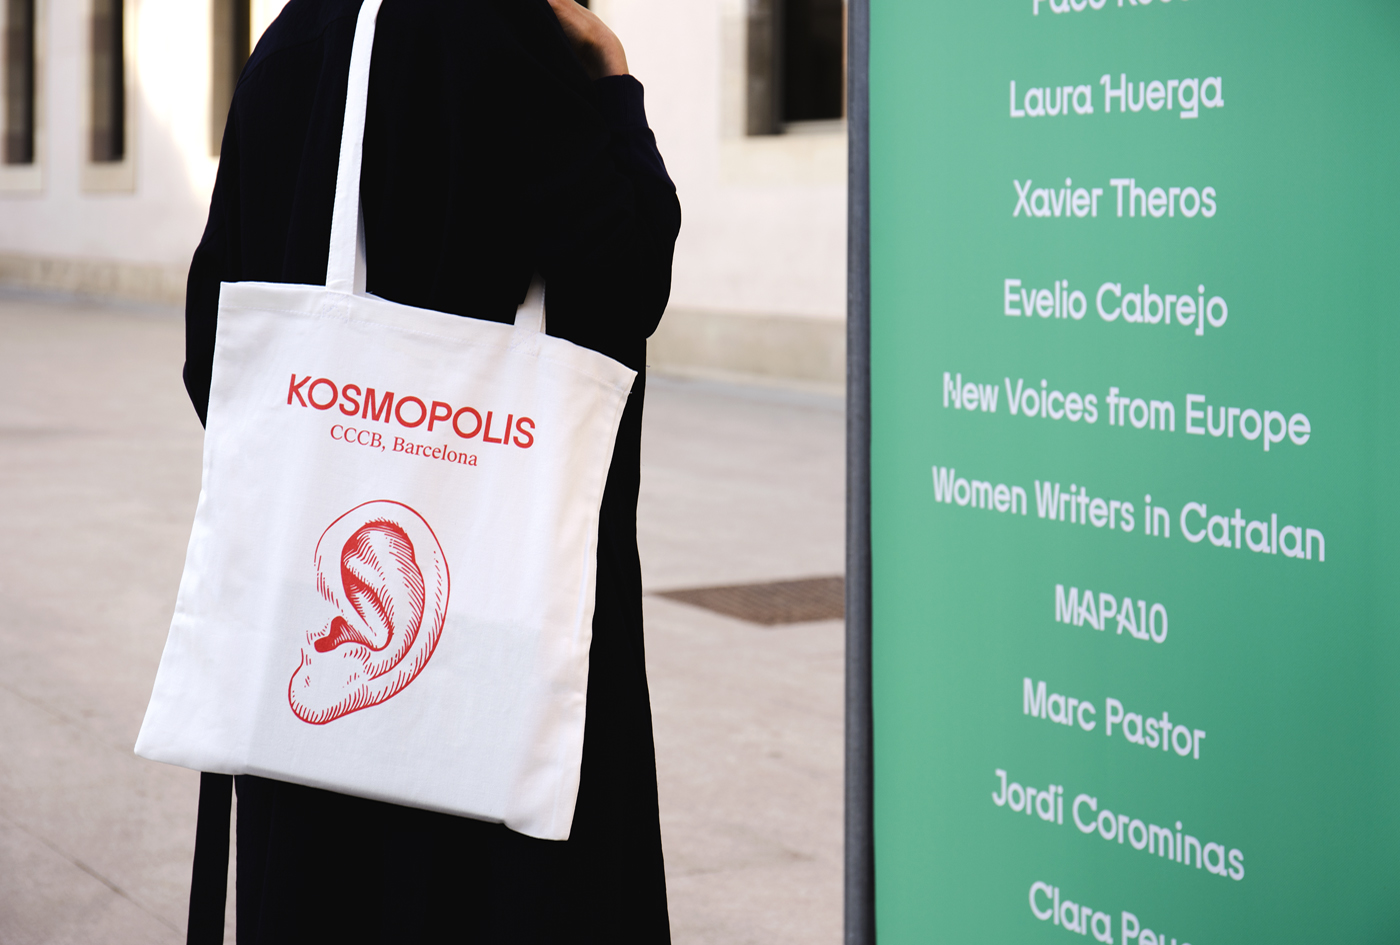 Visual identity and branded tote bag by Hey for Barcelona literature festival Kosmopolis